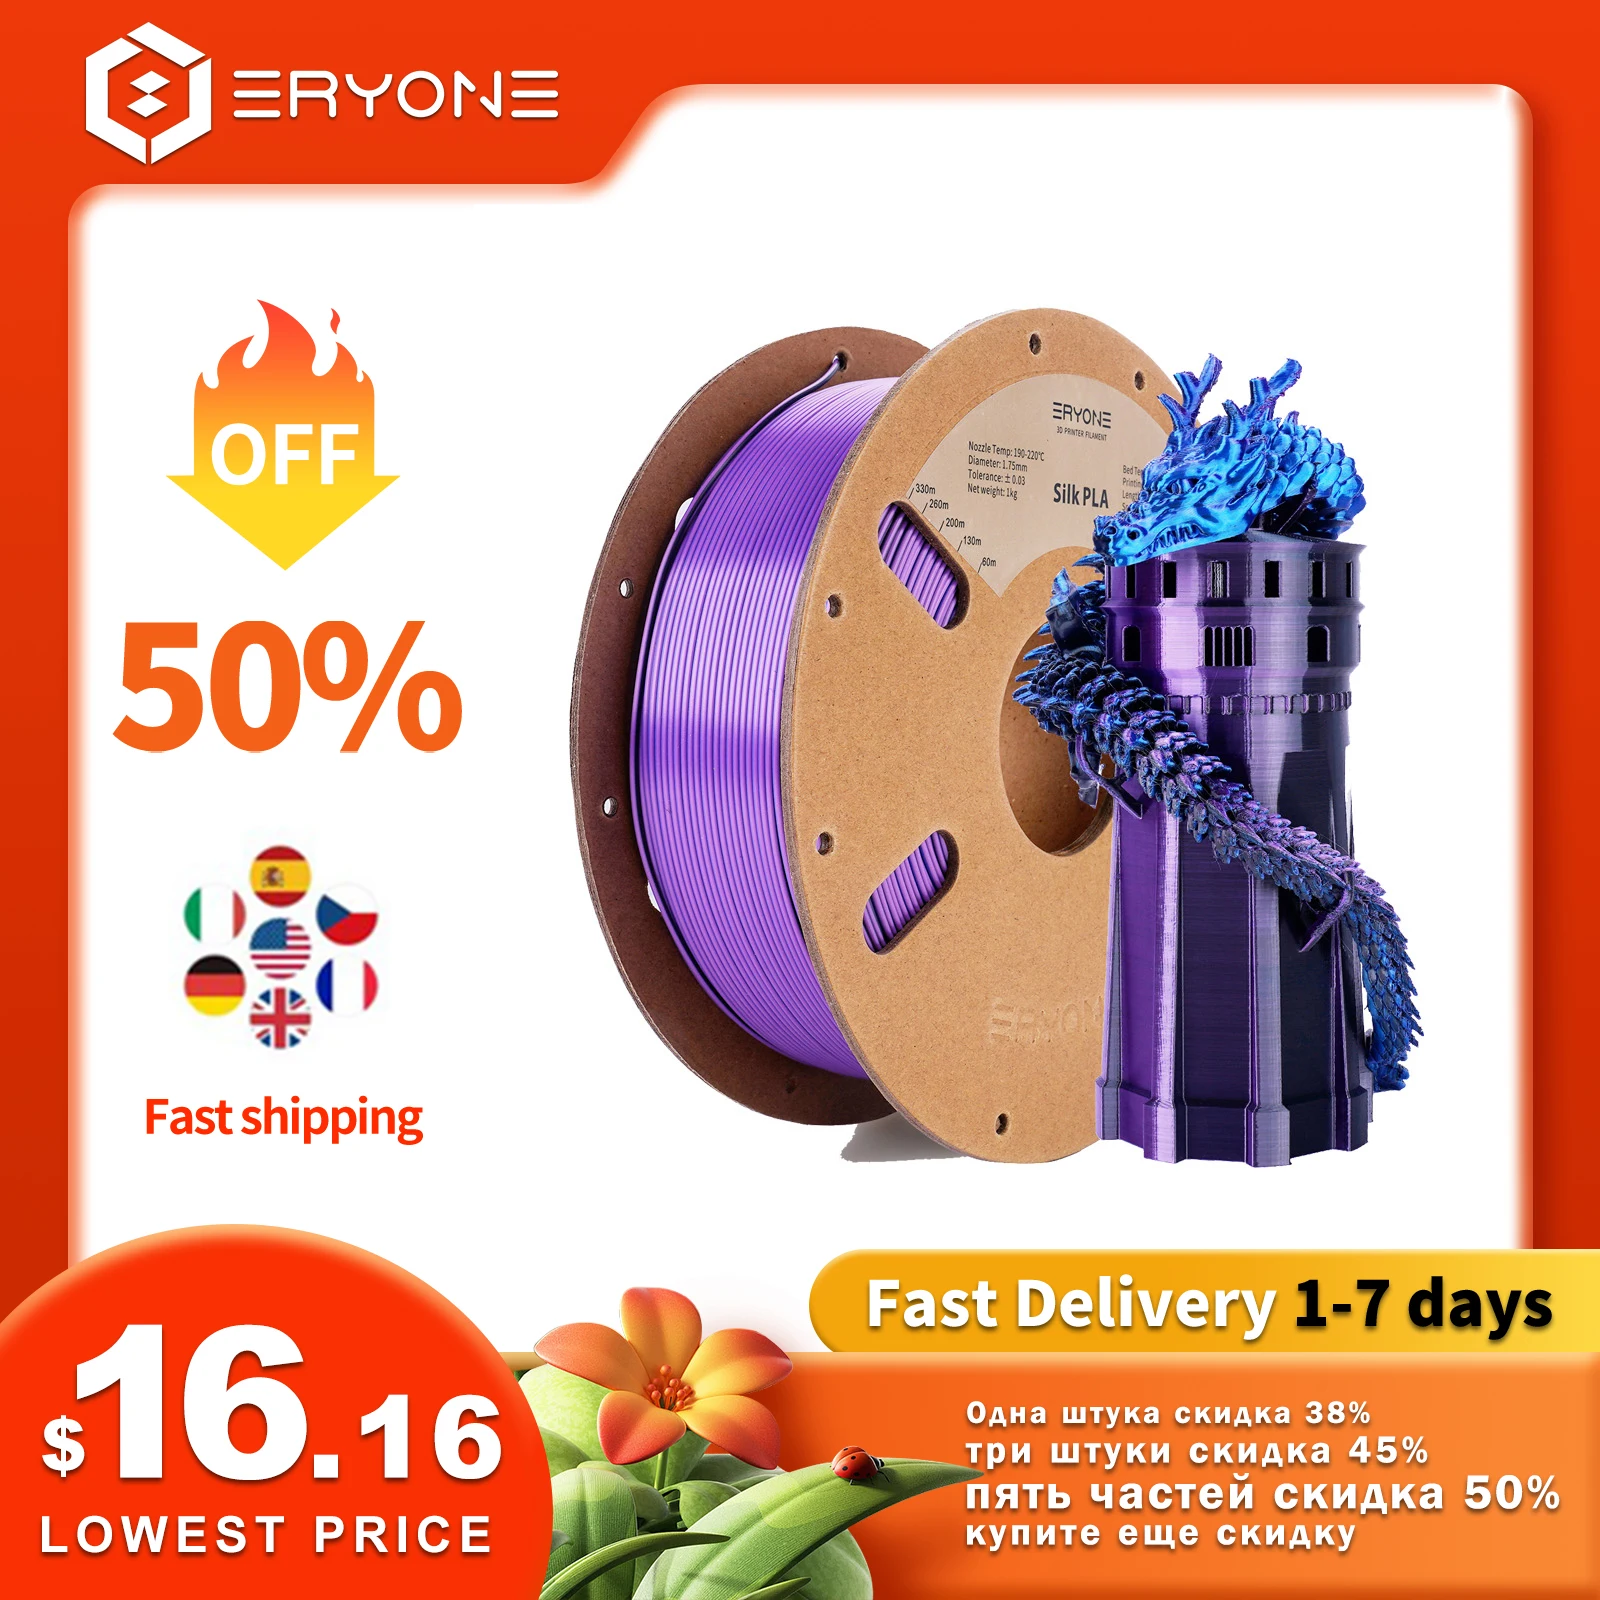 

Eryone New Arrival Tri-color Co-extrusion Silk PLA Series Filament 1KG 1.75mm ±0.03mm For FDM 3D Printer Fast Free Shipping